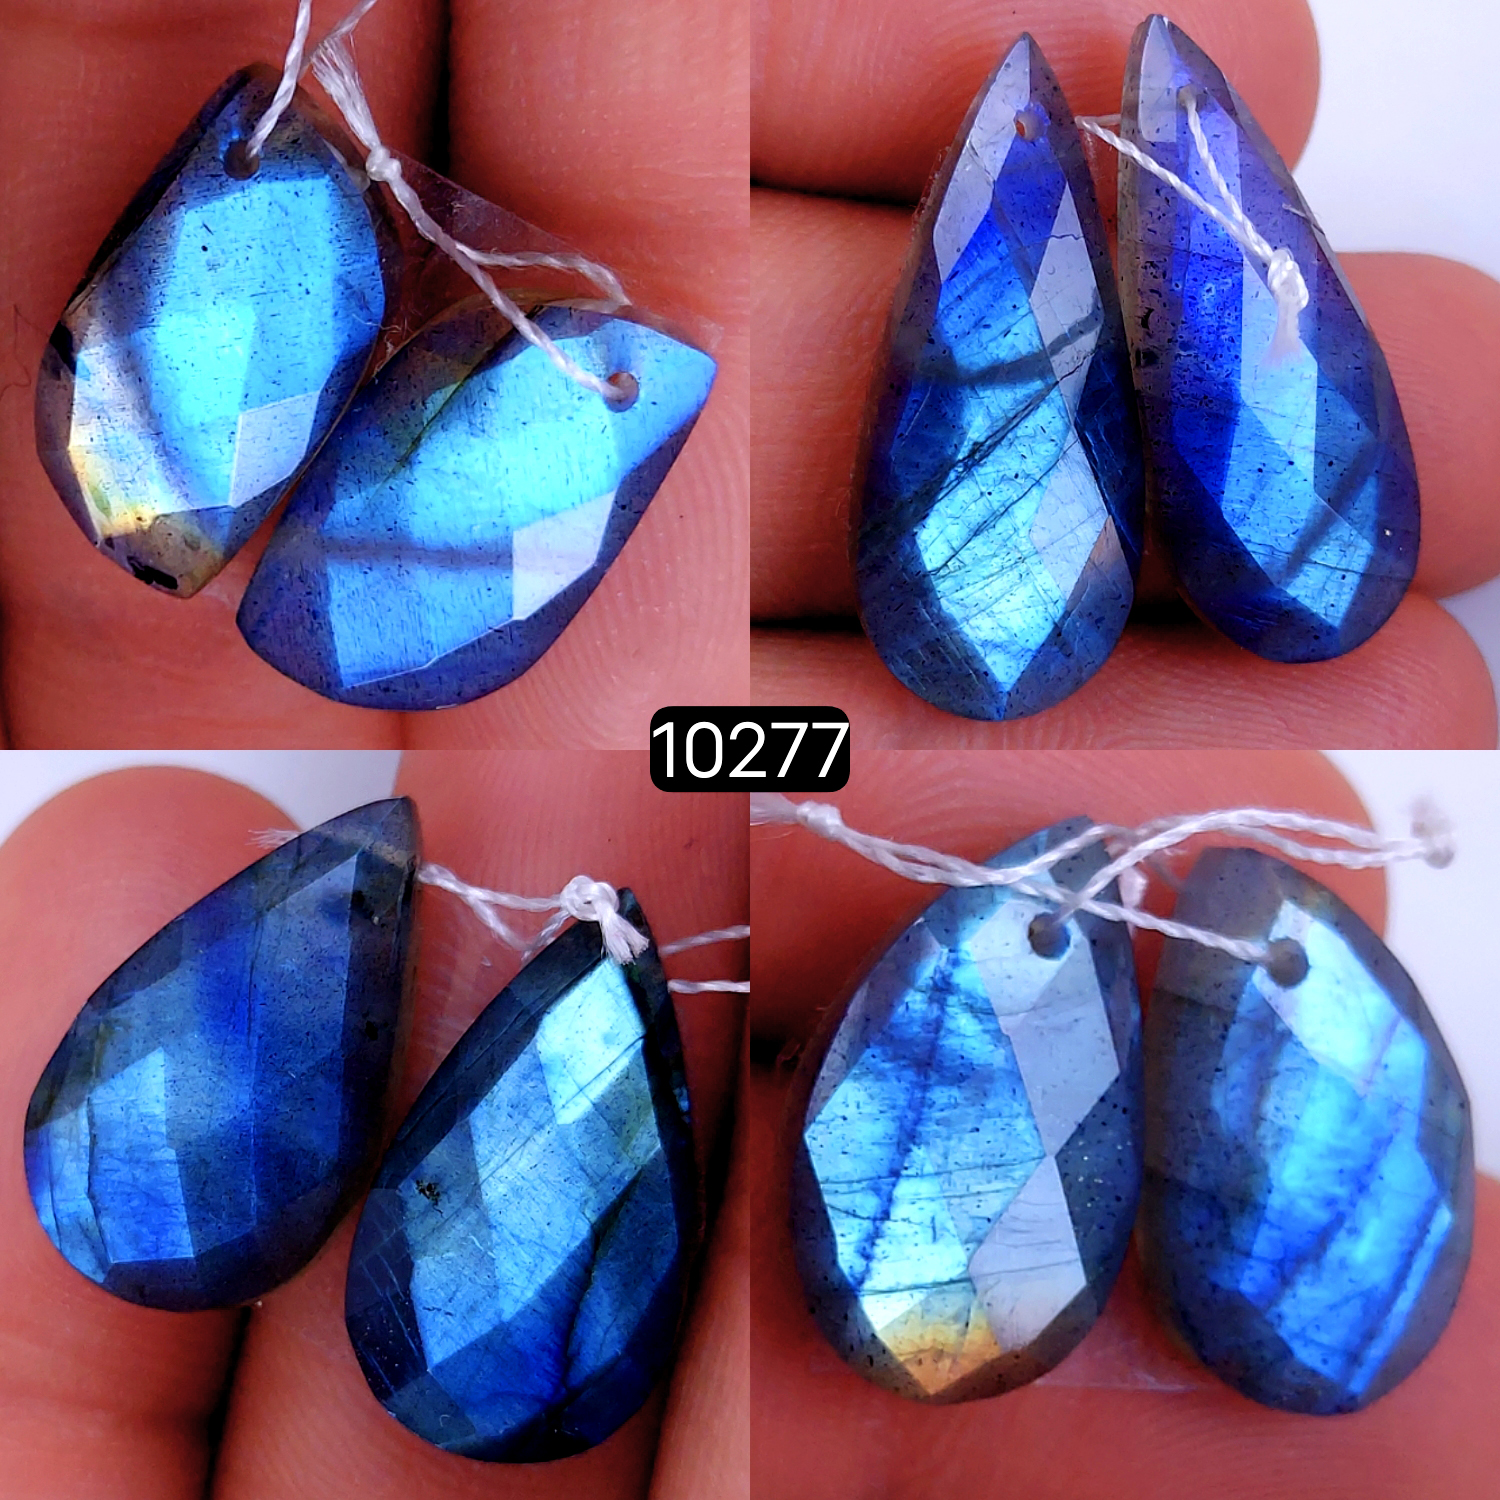 4Pair 83Cts Natural Labradorite Faceted Crystal Drill Dangle Drop Earring Pairs Silver Earrings Rose cut Labradorite Hoop Jewelry  27X10 16X9mm #10277